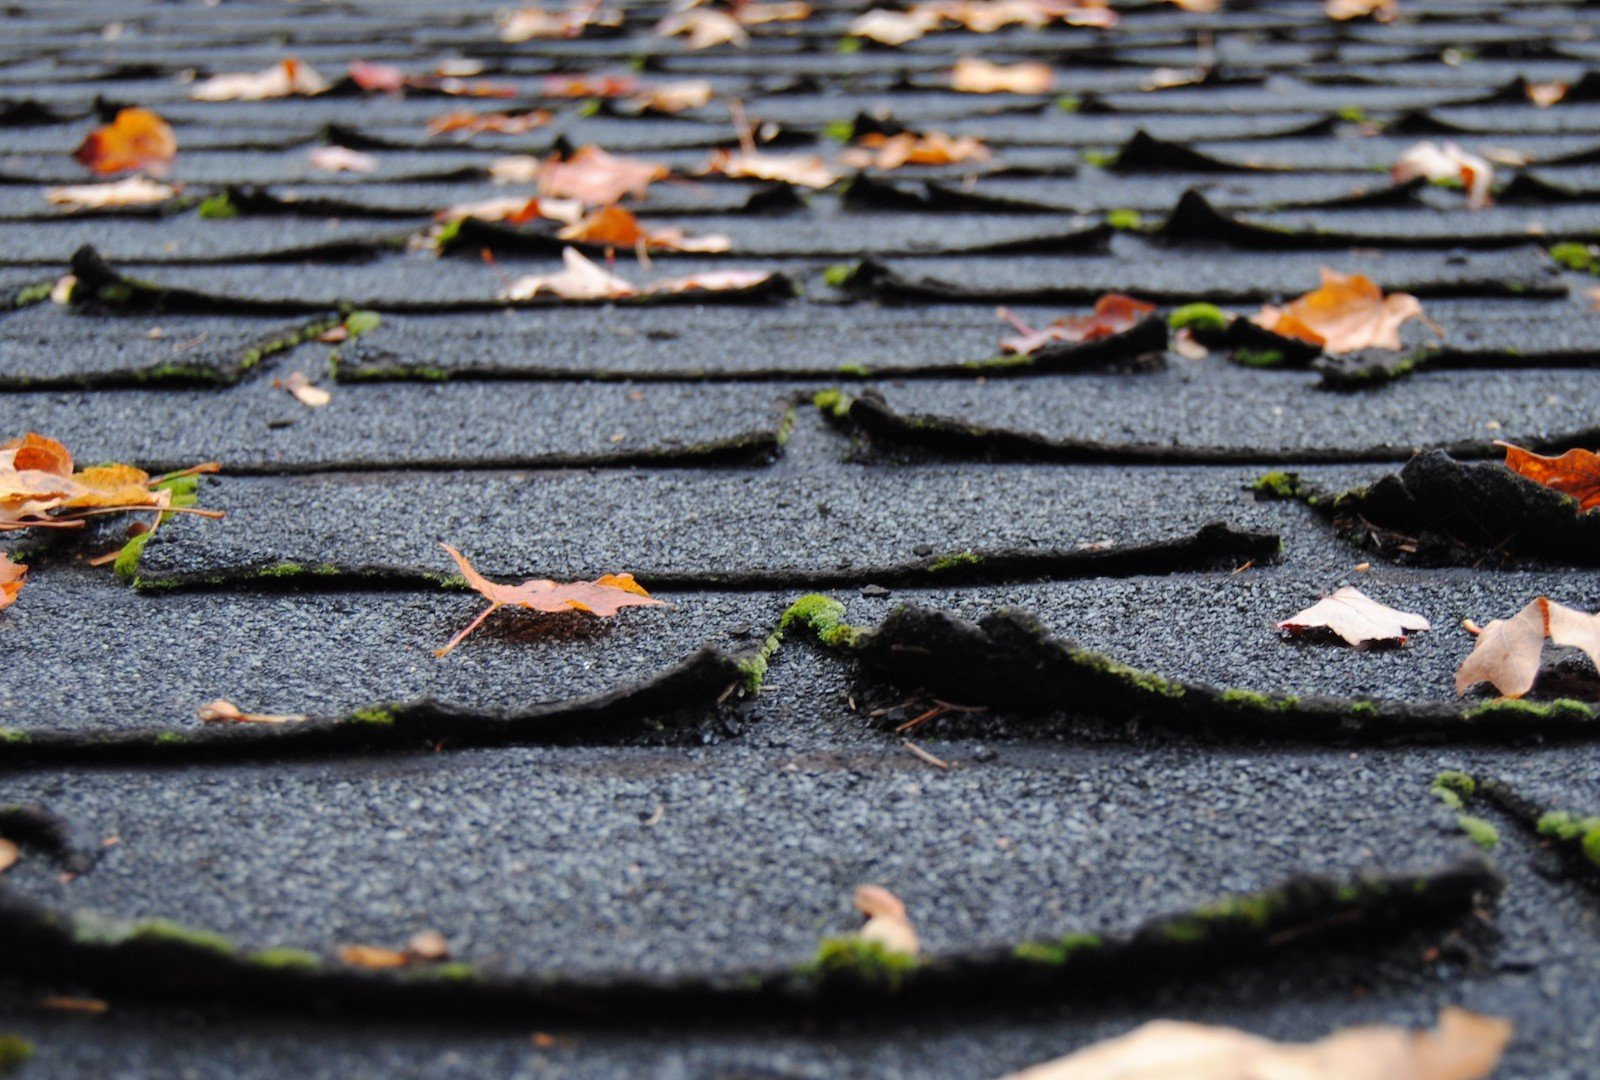 Roof maintenance checklist: are the shingles curled or buckled?